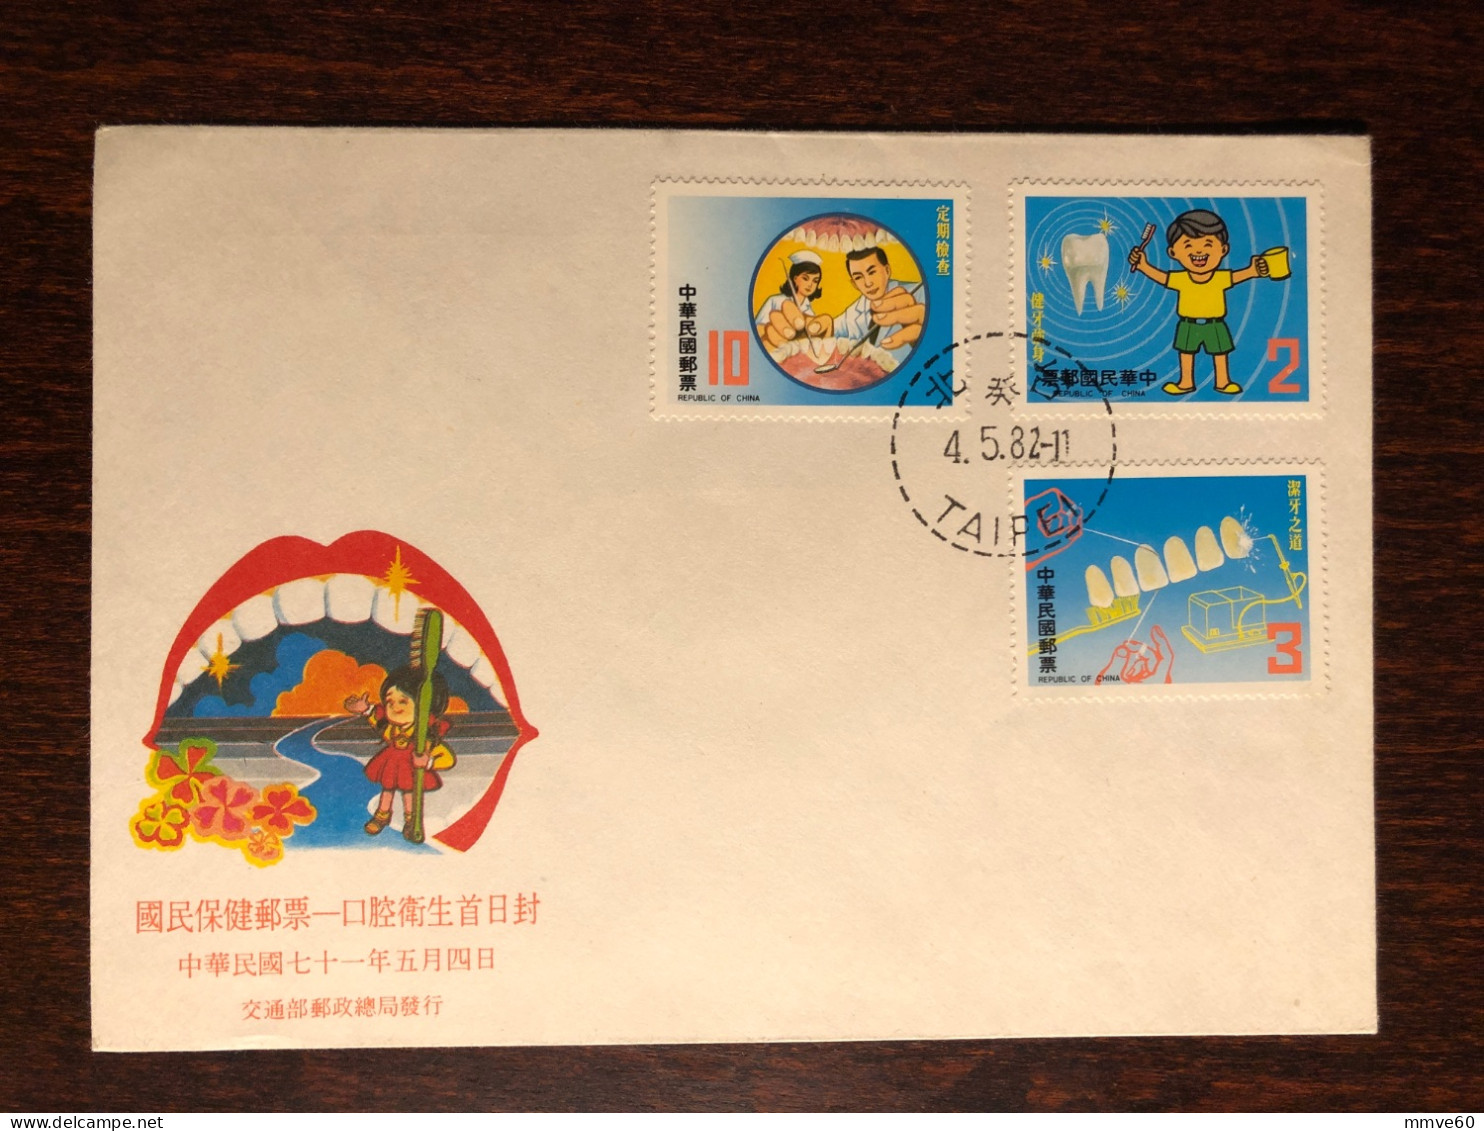 TAIWAN ROC FDC COVER 1982 YEAR DENTISTRY DENTAL HEALTH MEDICINE STAMPS - FDC